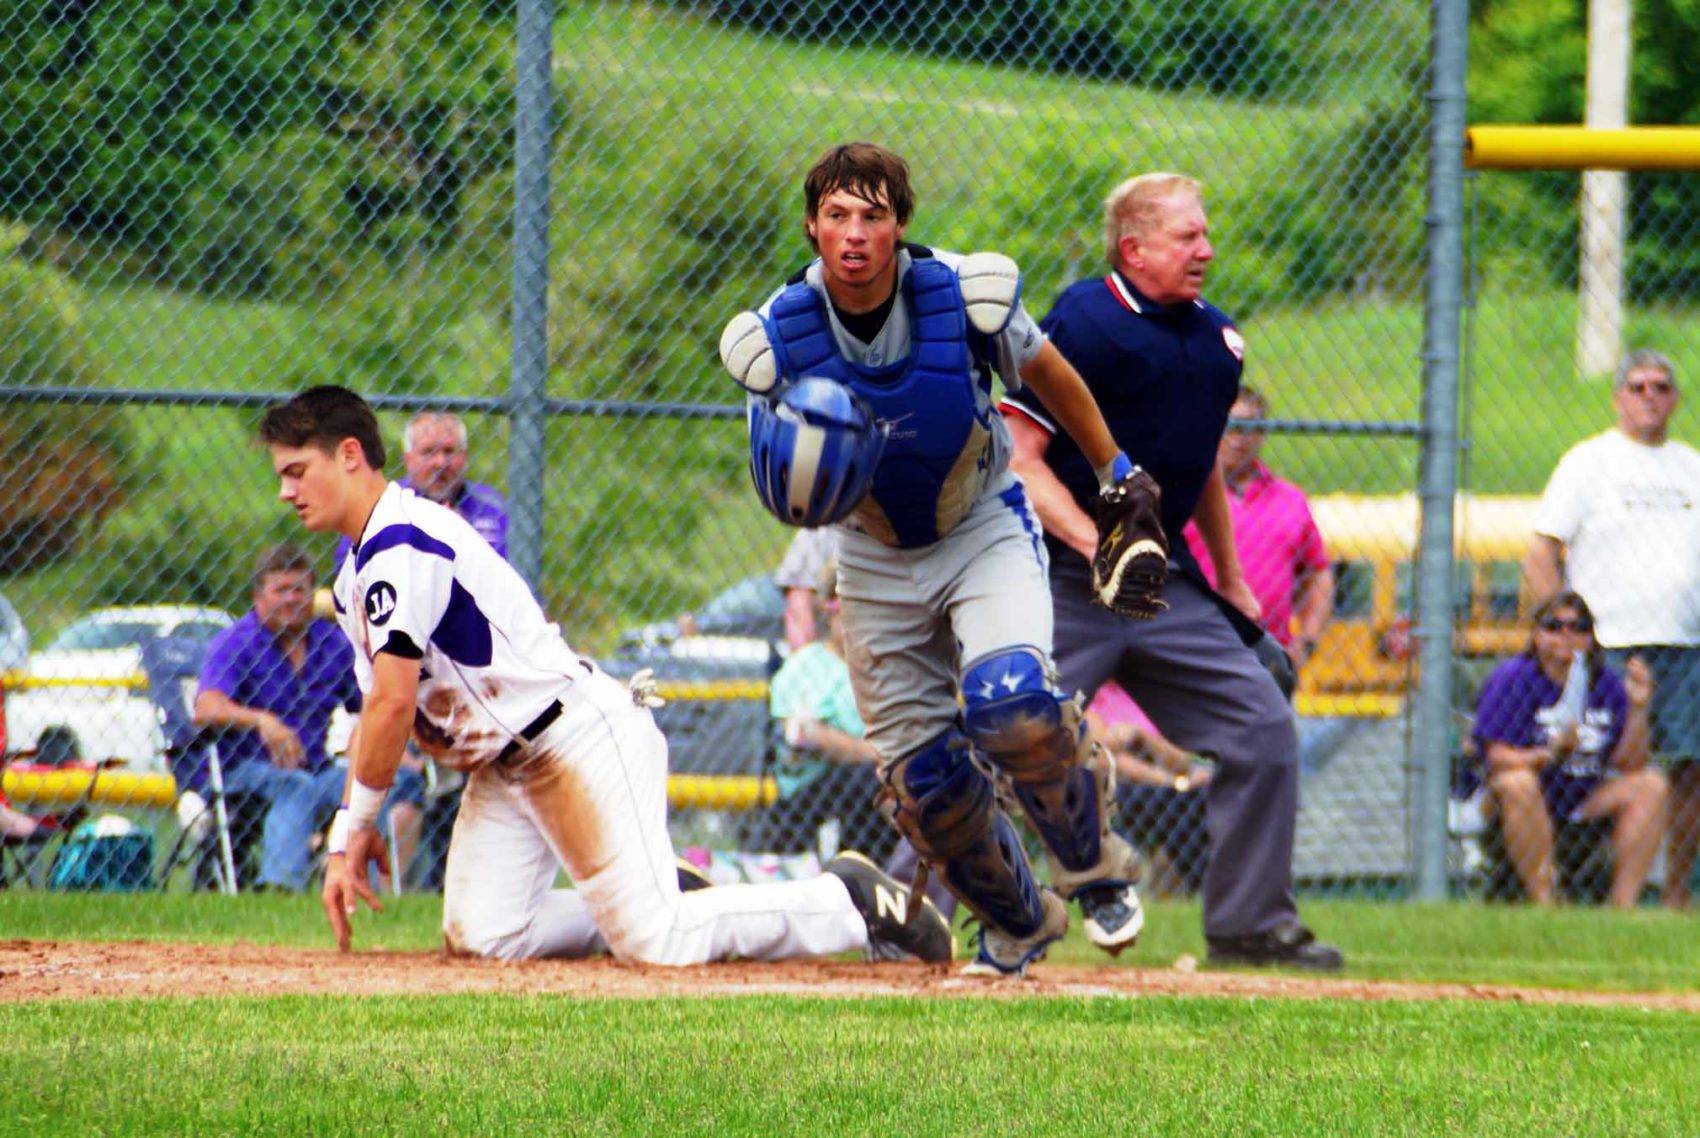 Oakridge baseball team loses an extra-inning heartbreaker, 6-5 to Gladstone, in state quarterfinals